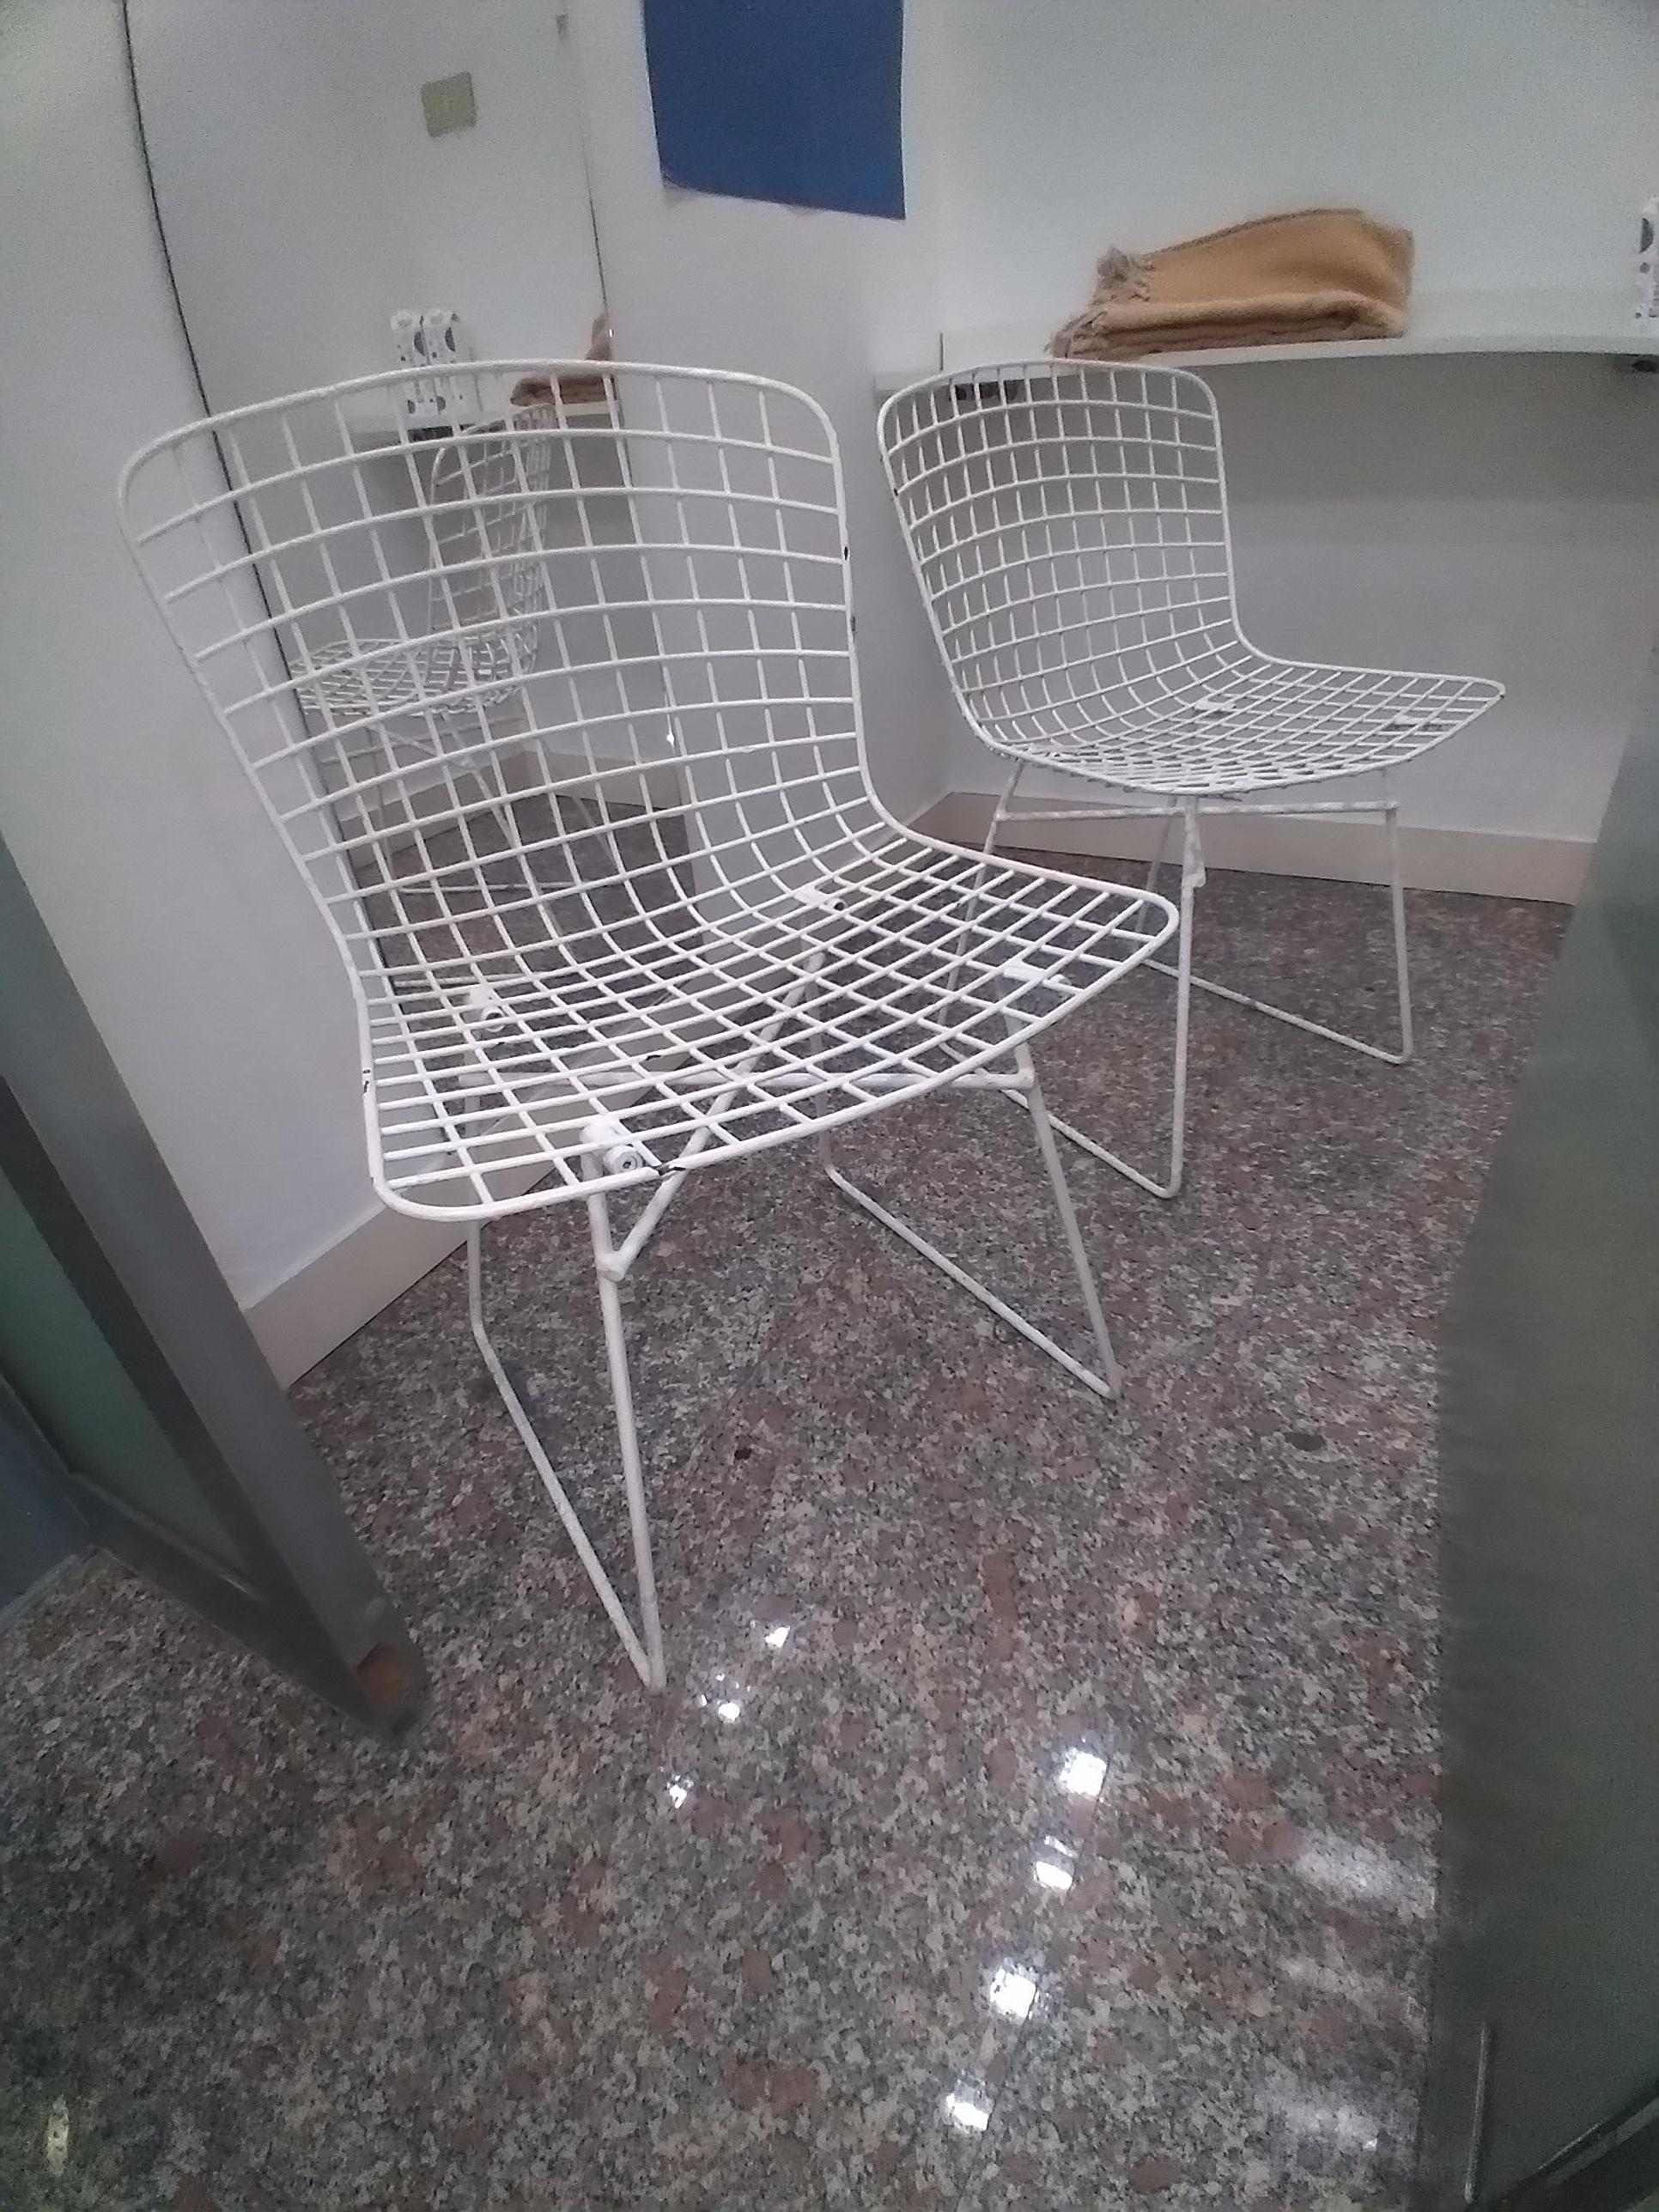 Harry Bertoia 2 chairs 1960 .This type of chair by architect Harry Bertoia is an icon of dedign.These two chairs are original and intact .They are suitable for any type of environment .They are well preserved .